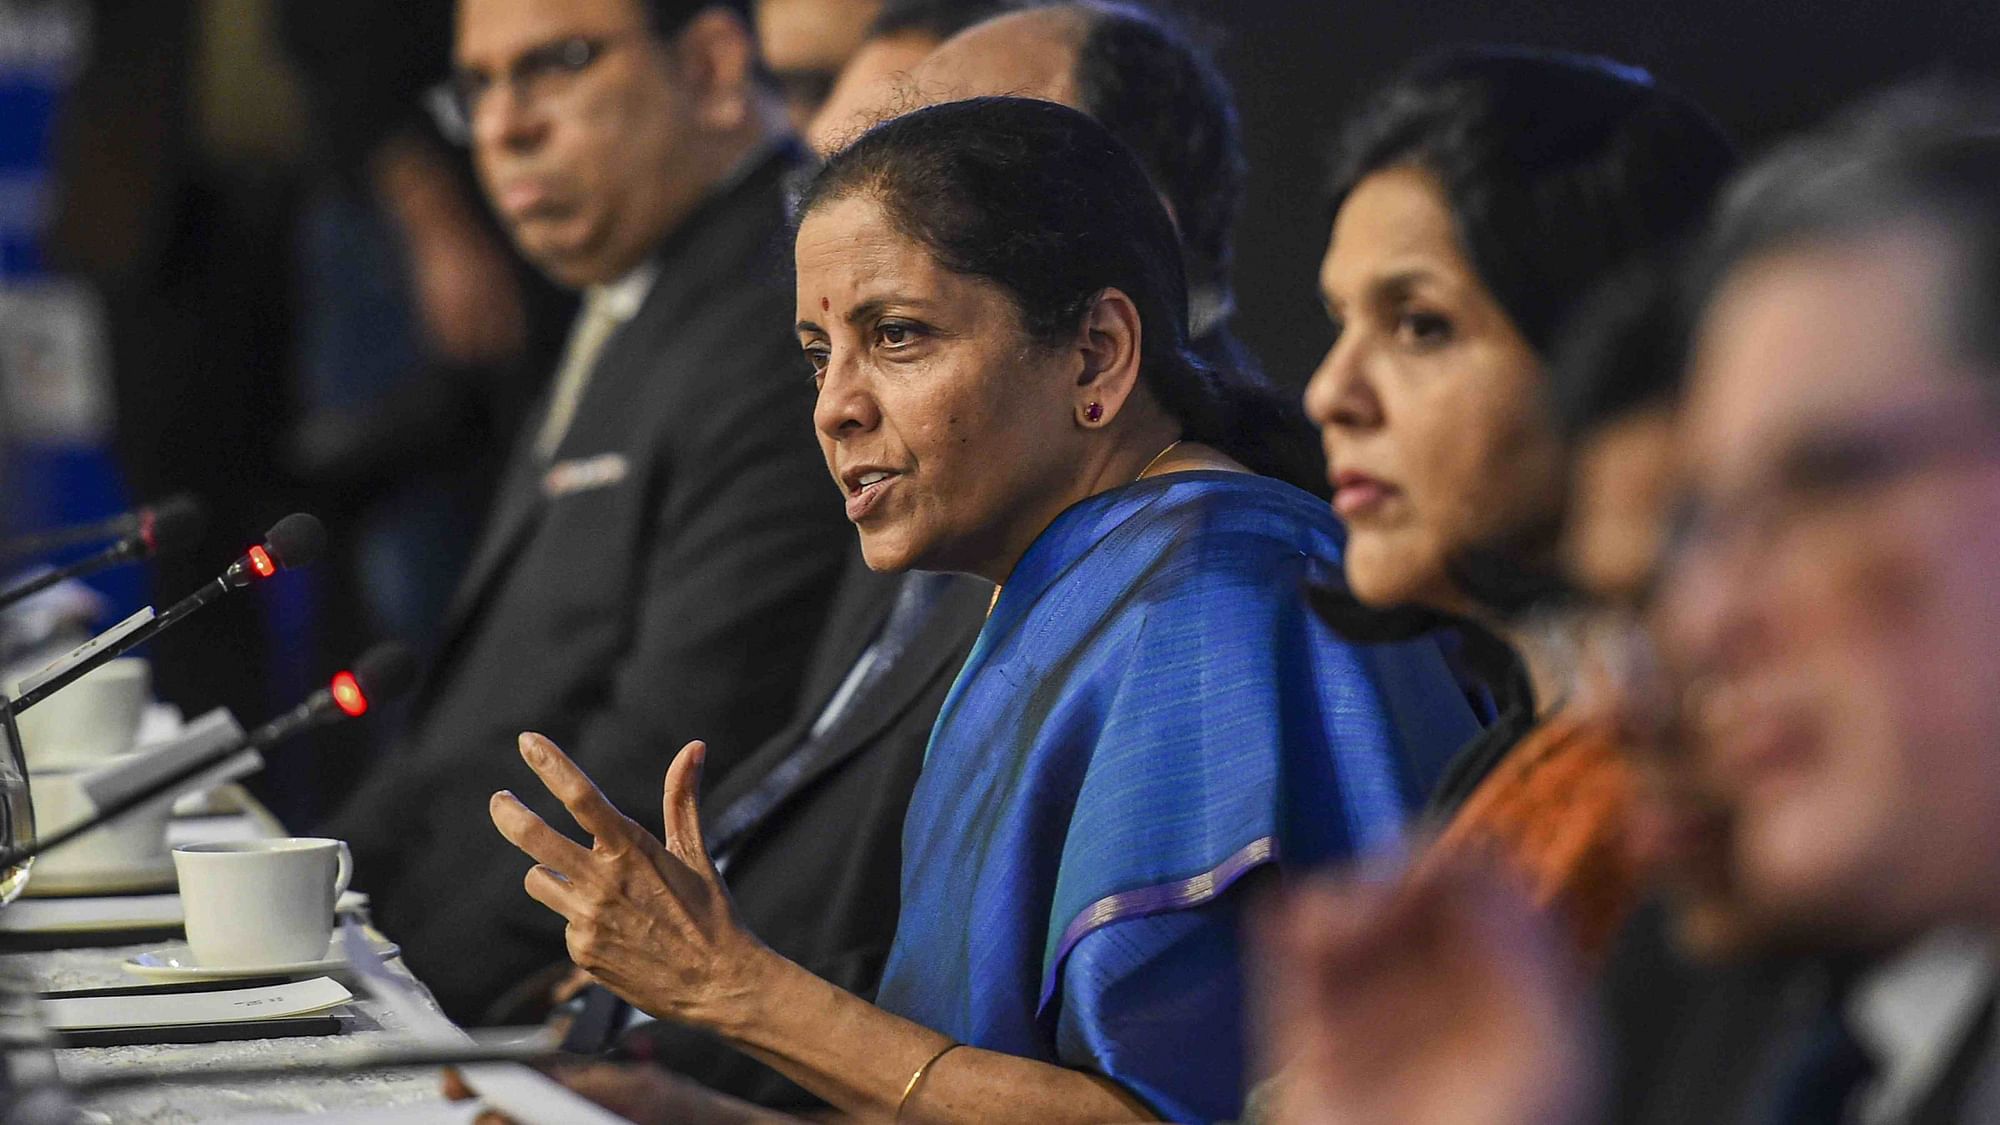 Finance Minister Nirmala Sitharaman during the FICCI National Executive Committee meeting in Delhi on 3 February.